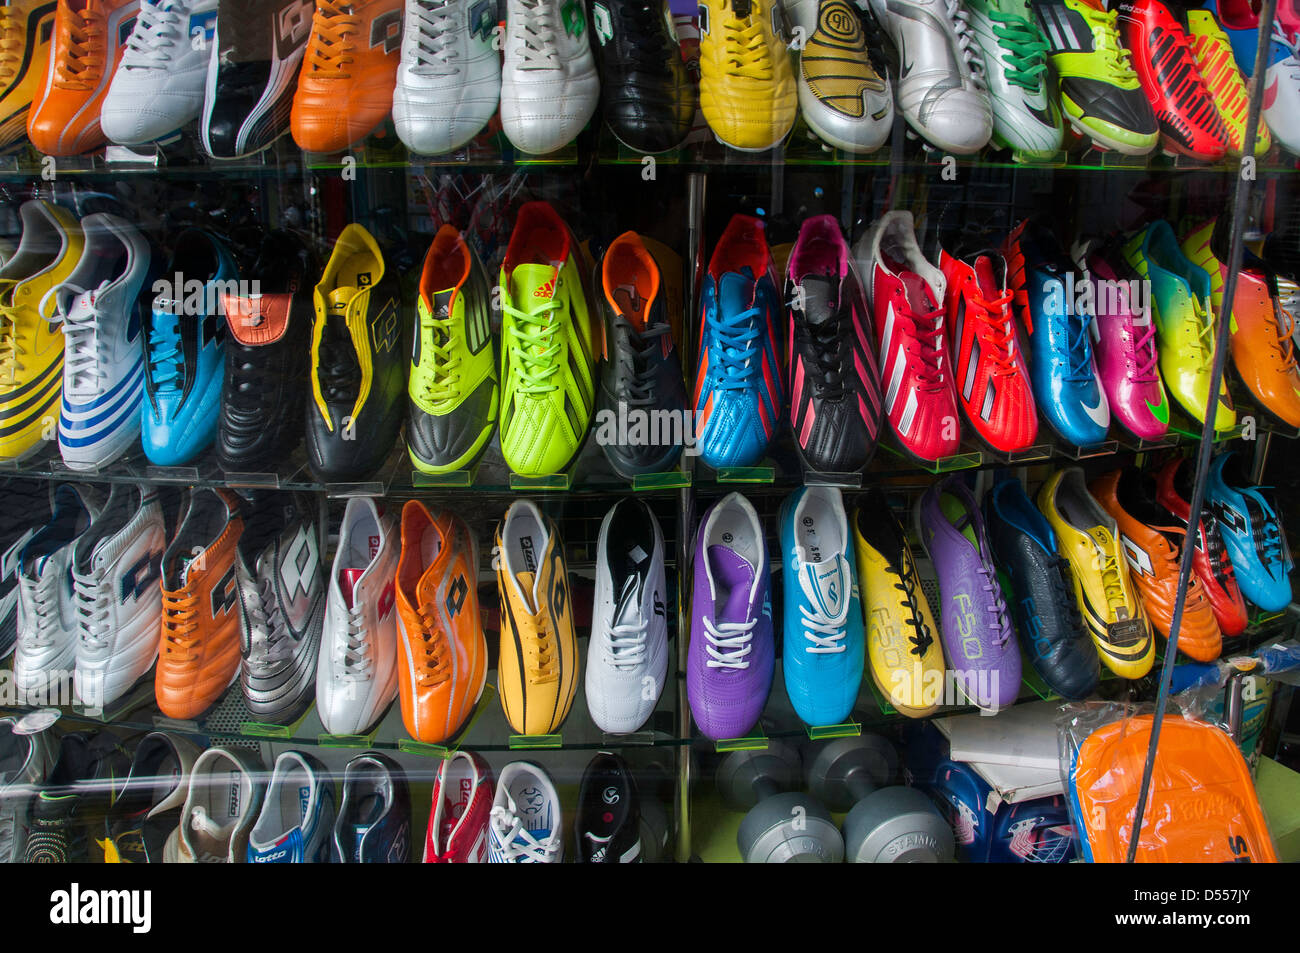 Football boots for sale in the Maldives 